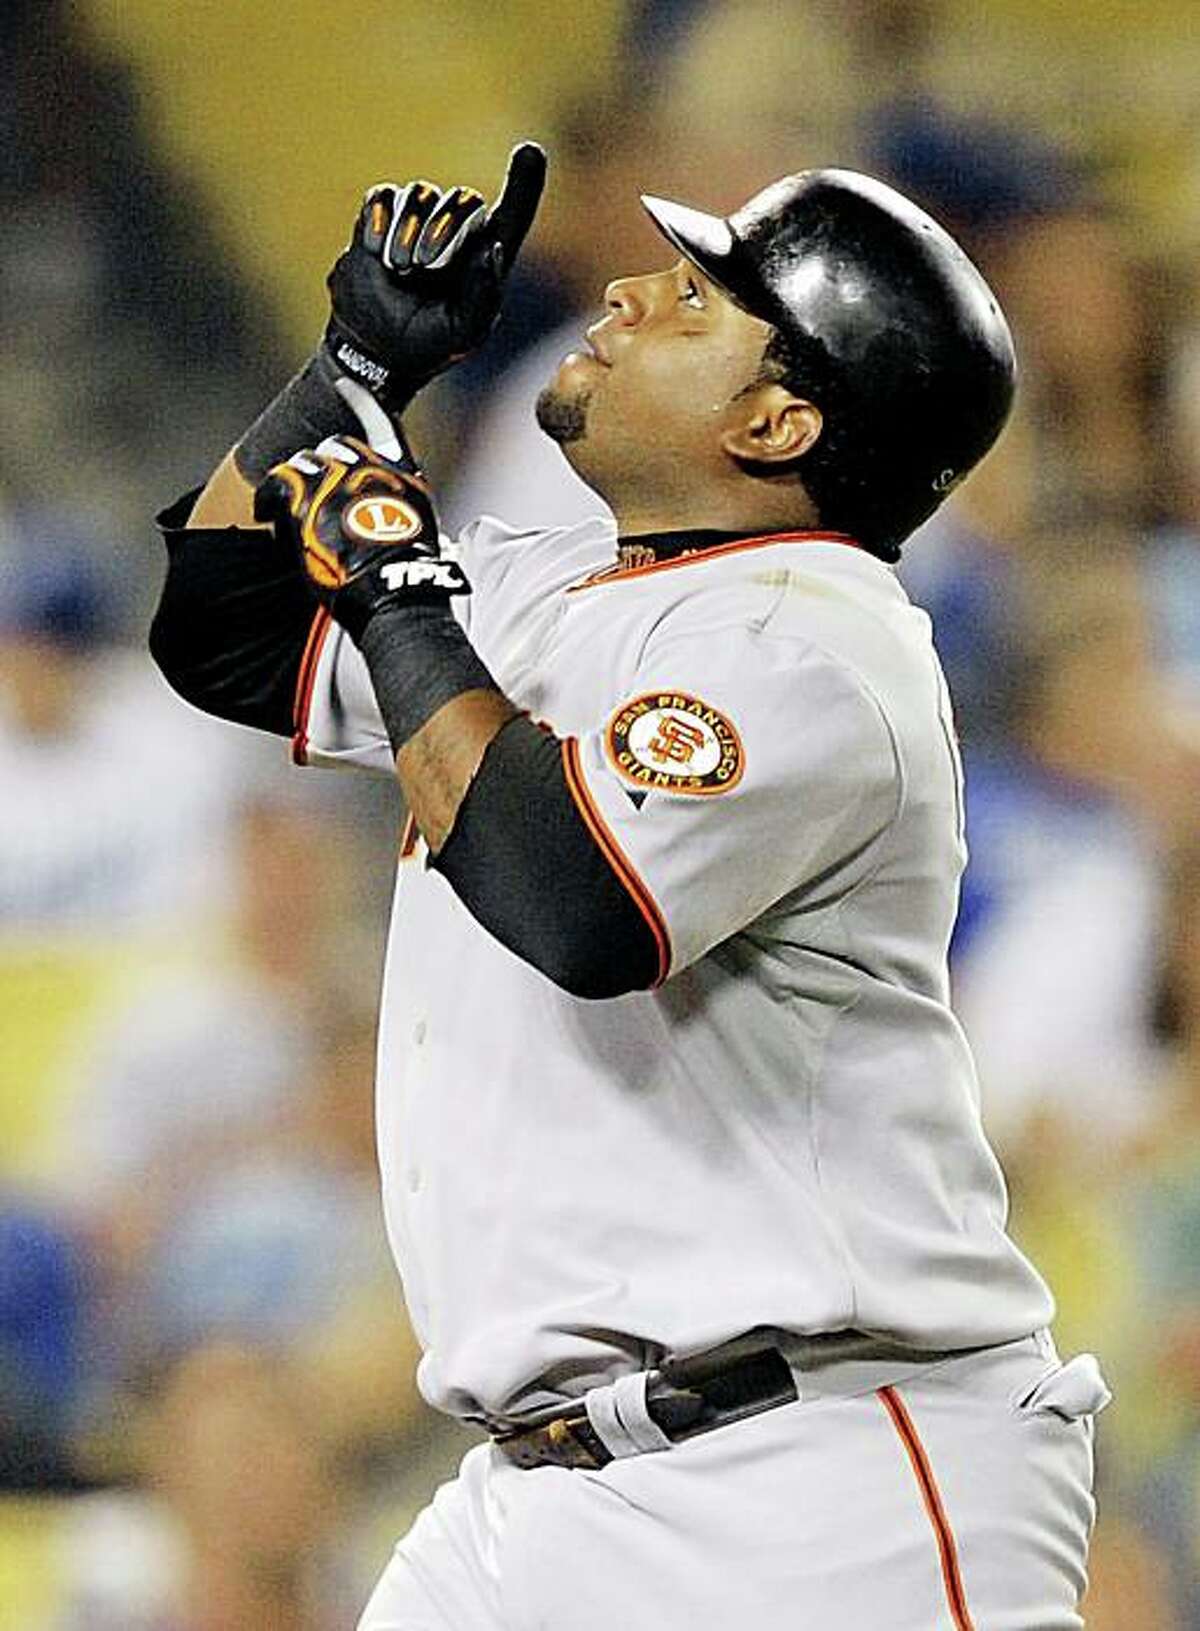 San Francisco Giants' Pablo Sandoval celebrates after hitting a three-run home run during the third inning of their Major League Baseball game against the Los Angeles Dodgers, Friday, Sept. 18, 2009, in Los Angeles. (AP Photo/Mark J. Terrill)